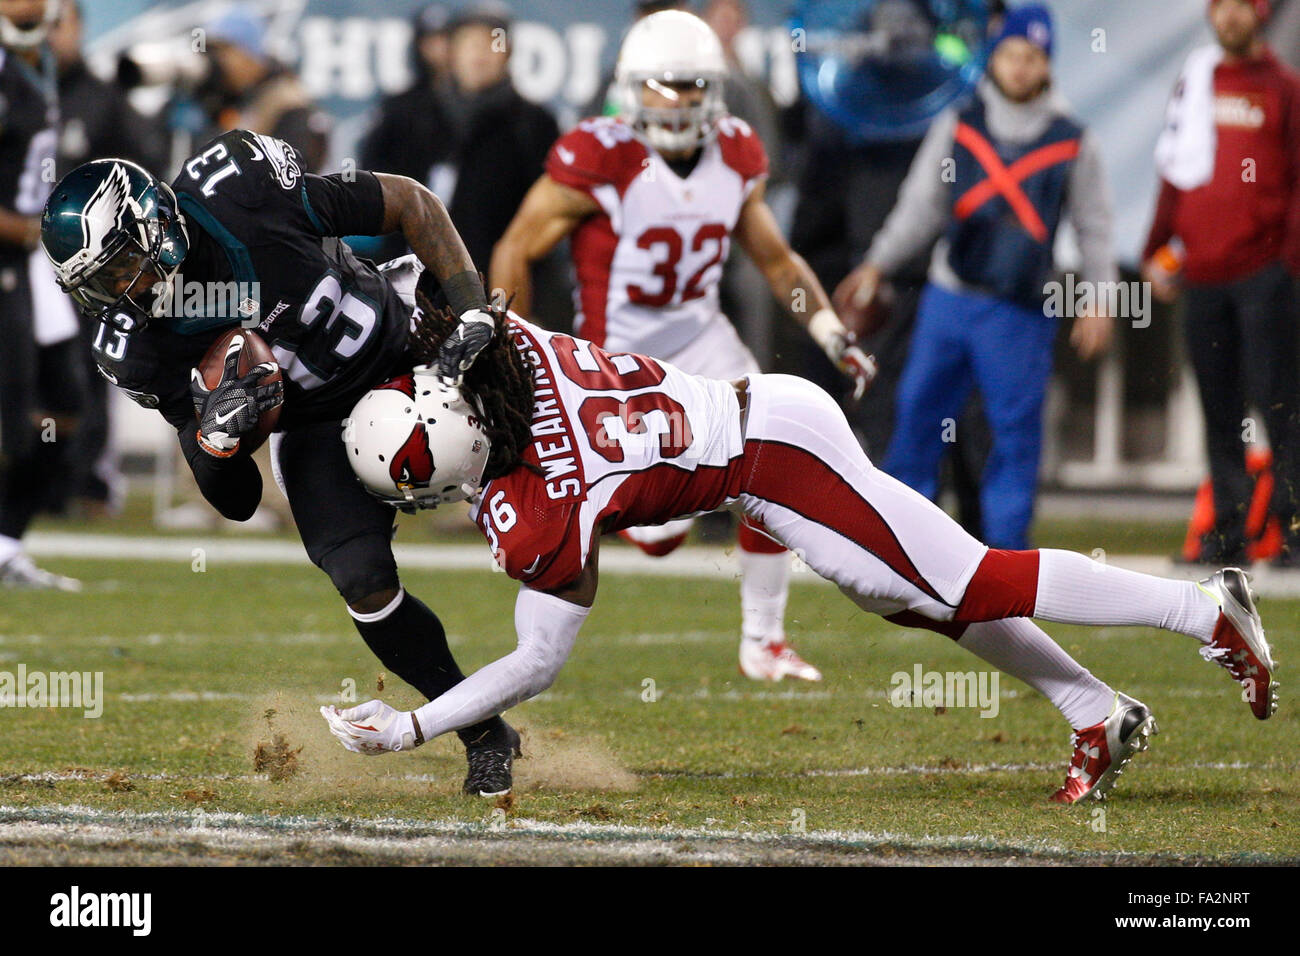 Philadelphia, Pennsylvania, USA. 20th Dec, 2015. Philadelphia Eagles wide receiver Josh Huff (13) in action against Arizona Cardinals defensive back D.J. Swearinger (36) during the NFL game between the Arizona Cardinals and the Philadelphia Eagles at Lincoln Financial Field in Philadelphia, Pennsylvania. The Arizona Cardinals won 40-17. The Arizona Cardinals clinch the NFC West Division. Christopher Szagola/CSM/Alamy Live News Stock Photo